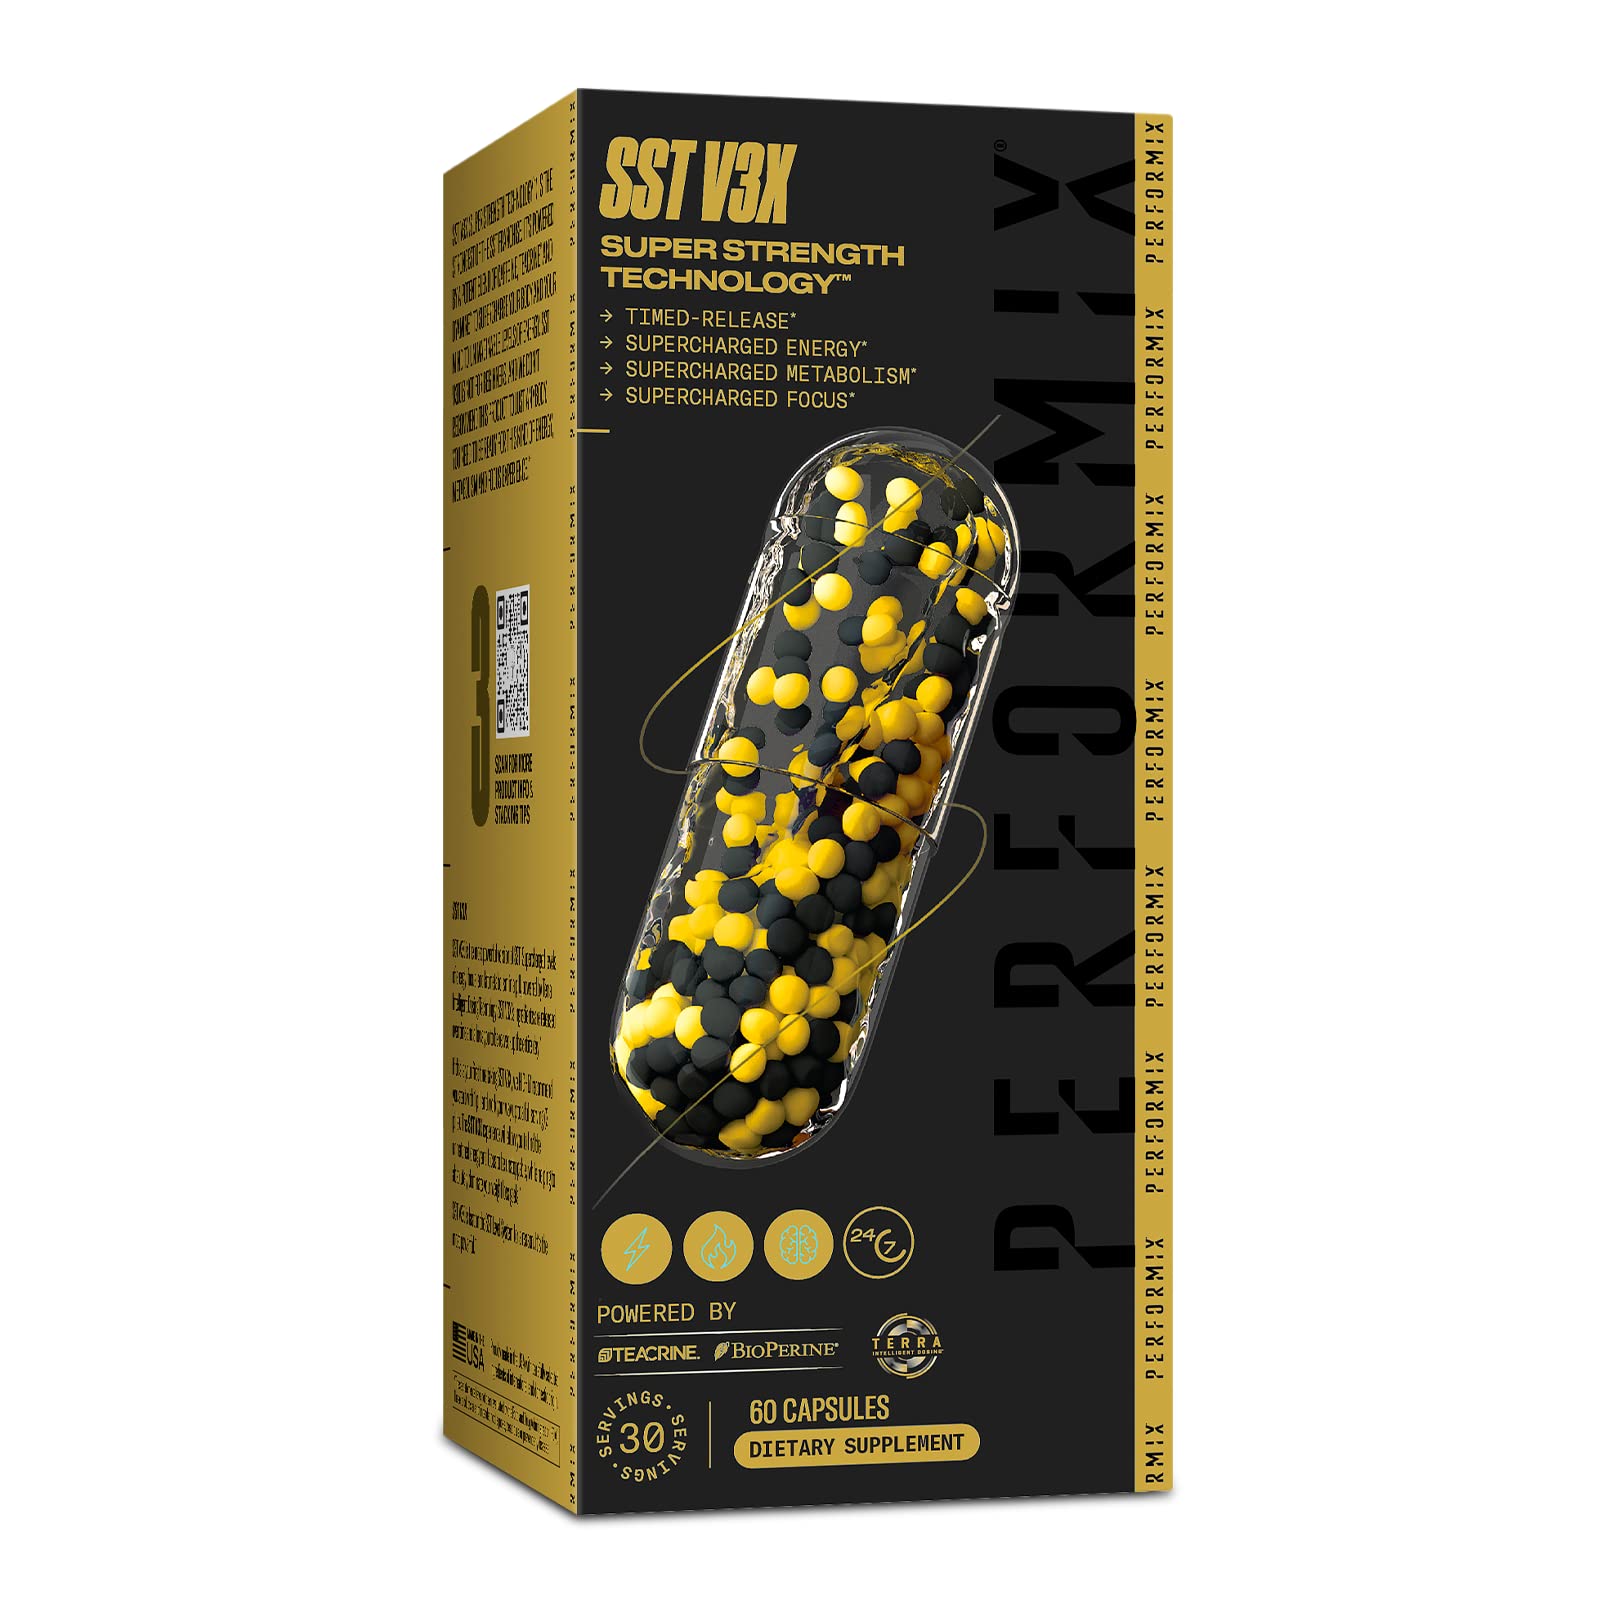 PERFORMIX SST V3X - 60 Capsules - Dietary Supplement for Supercharged Energy, Intense Mental Focus and Fast Metabolism - Caffeine, Dynamine, and Teacrine - 3X Longer Lasting